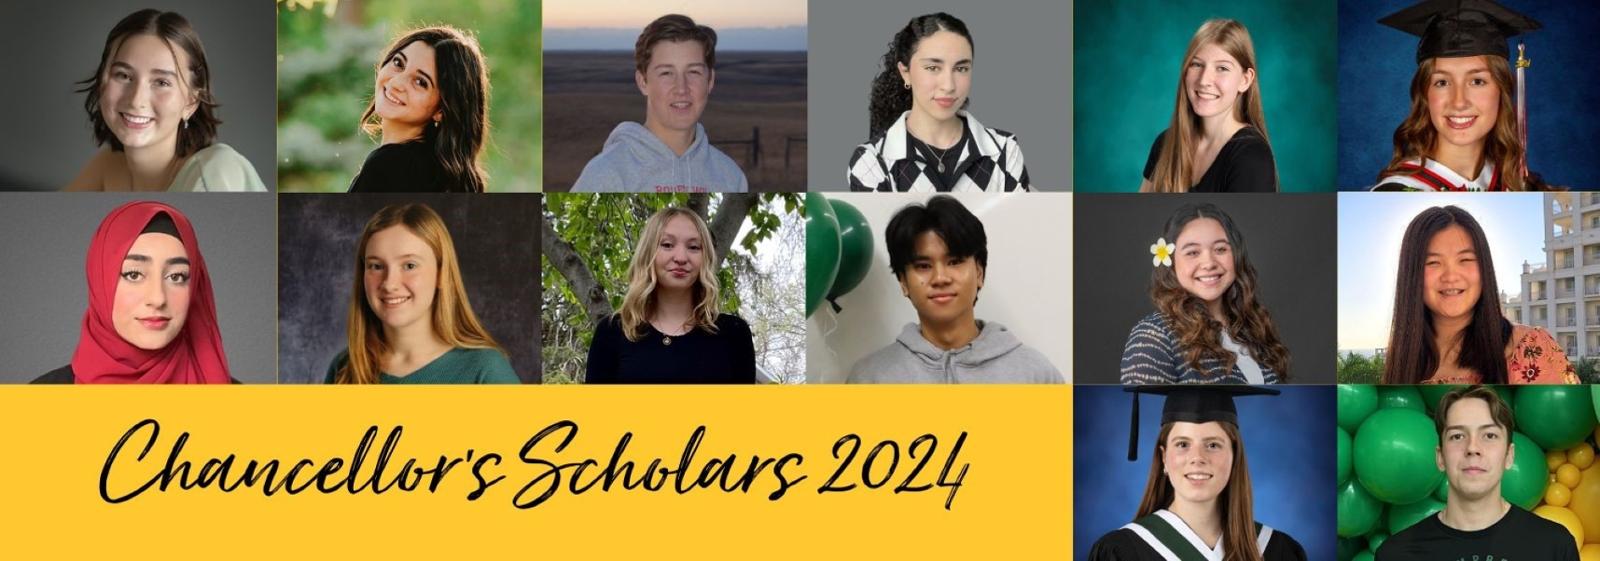 A photo collage of 14 separate headshots and “Chancellor’s Scholars 2024” written underneath.